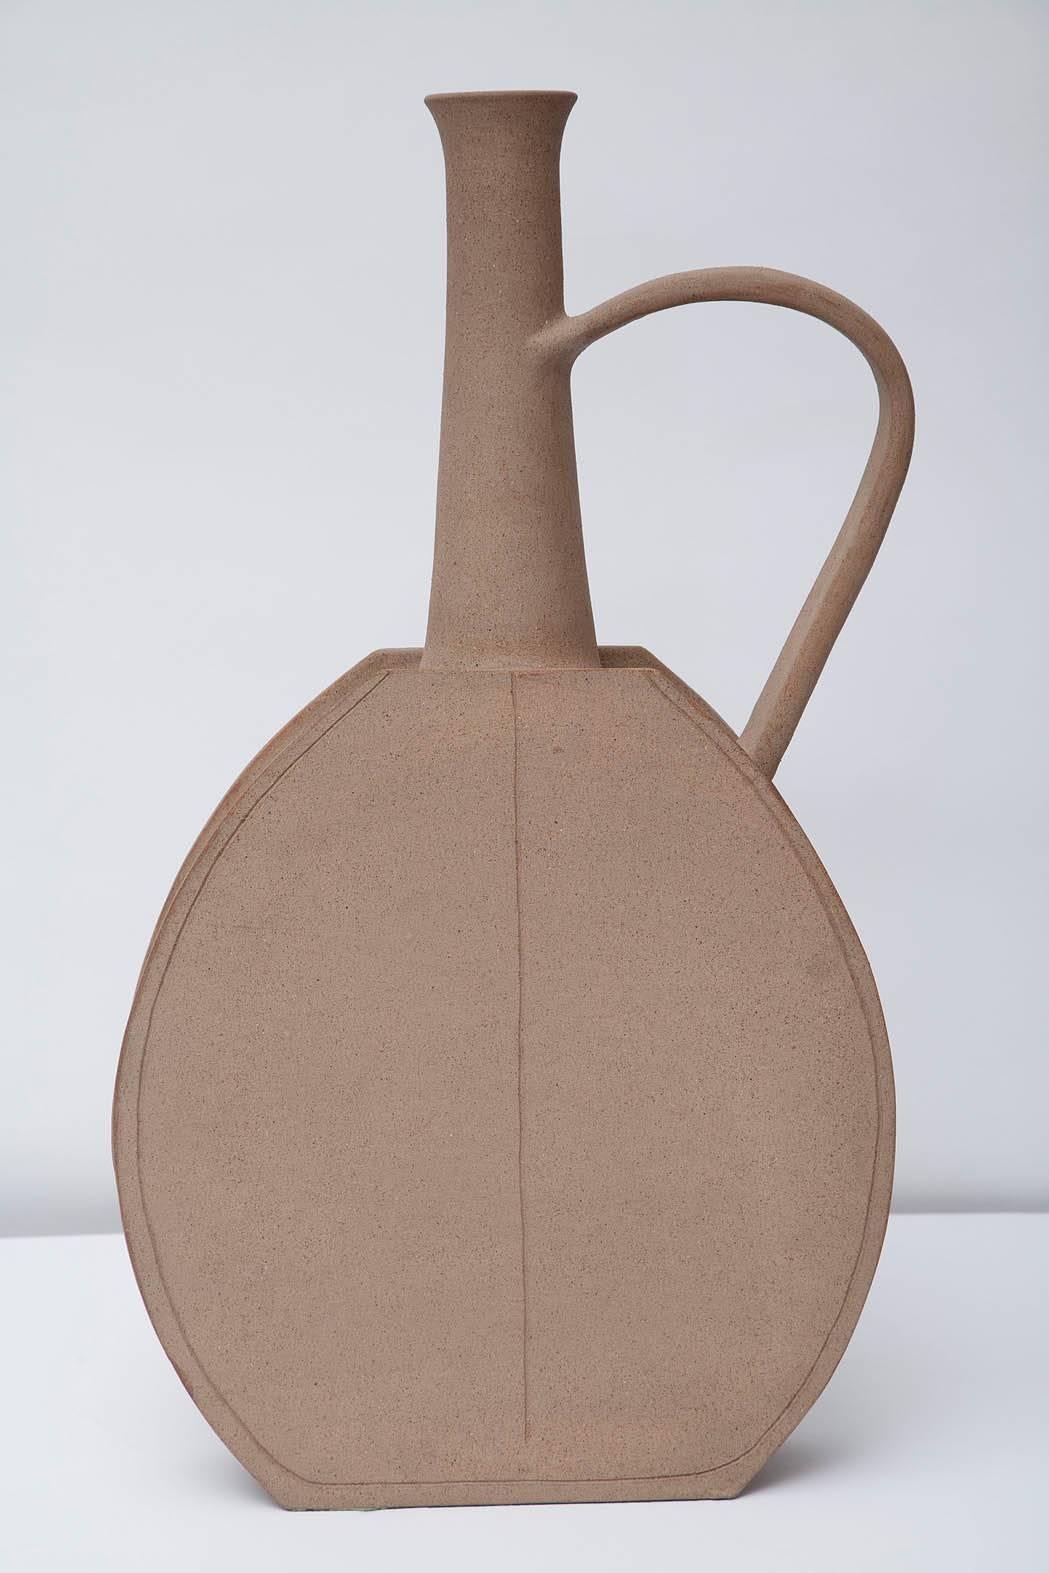 Exceptionally large ceramic pitcher-form vase with incised line decoration, by Bruno Gambone. Signed.